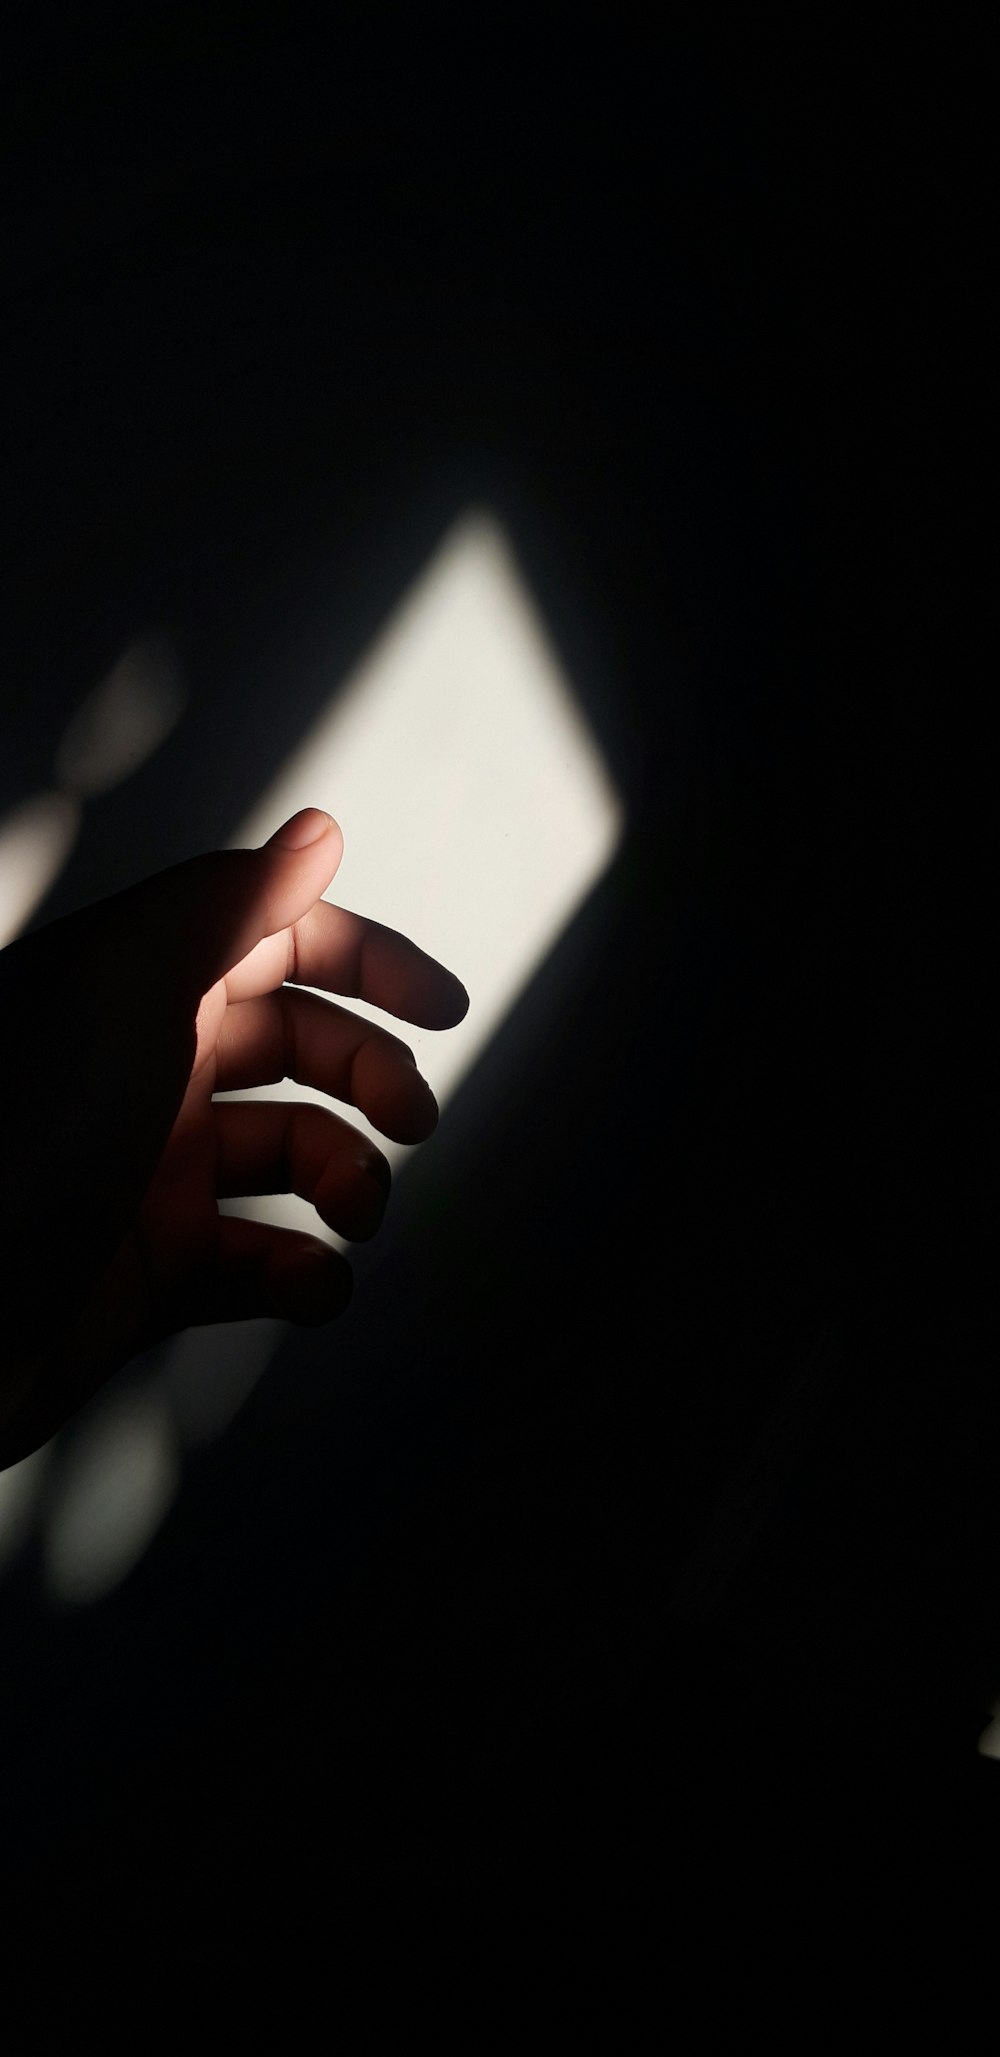 a person's hand reaching for something in the dark